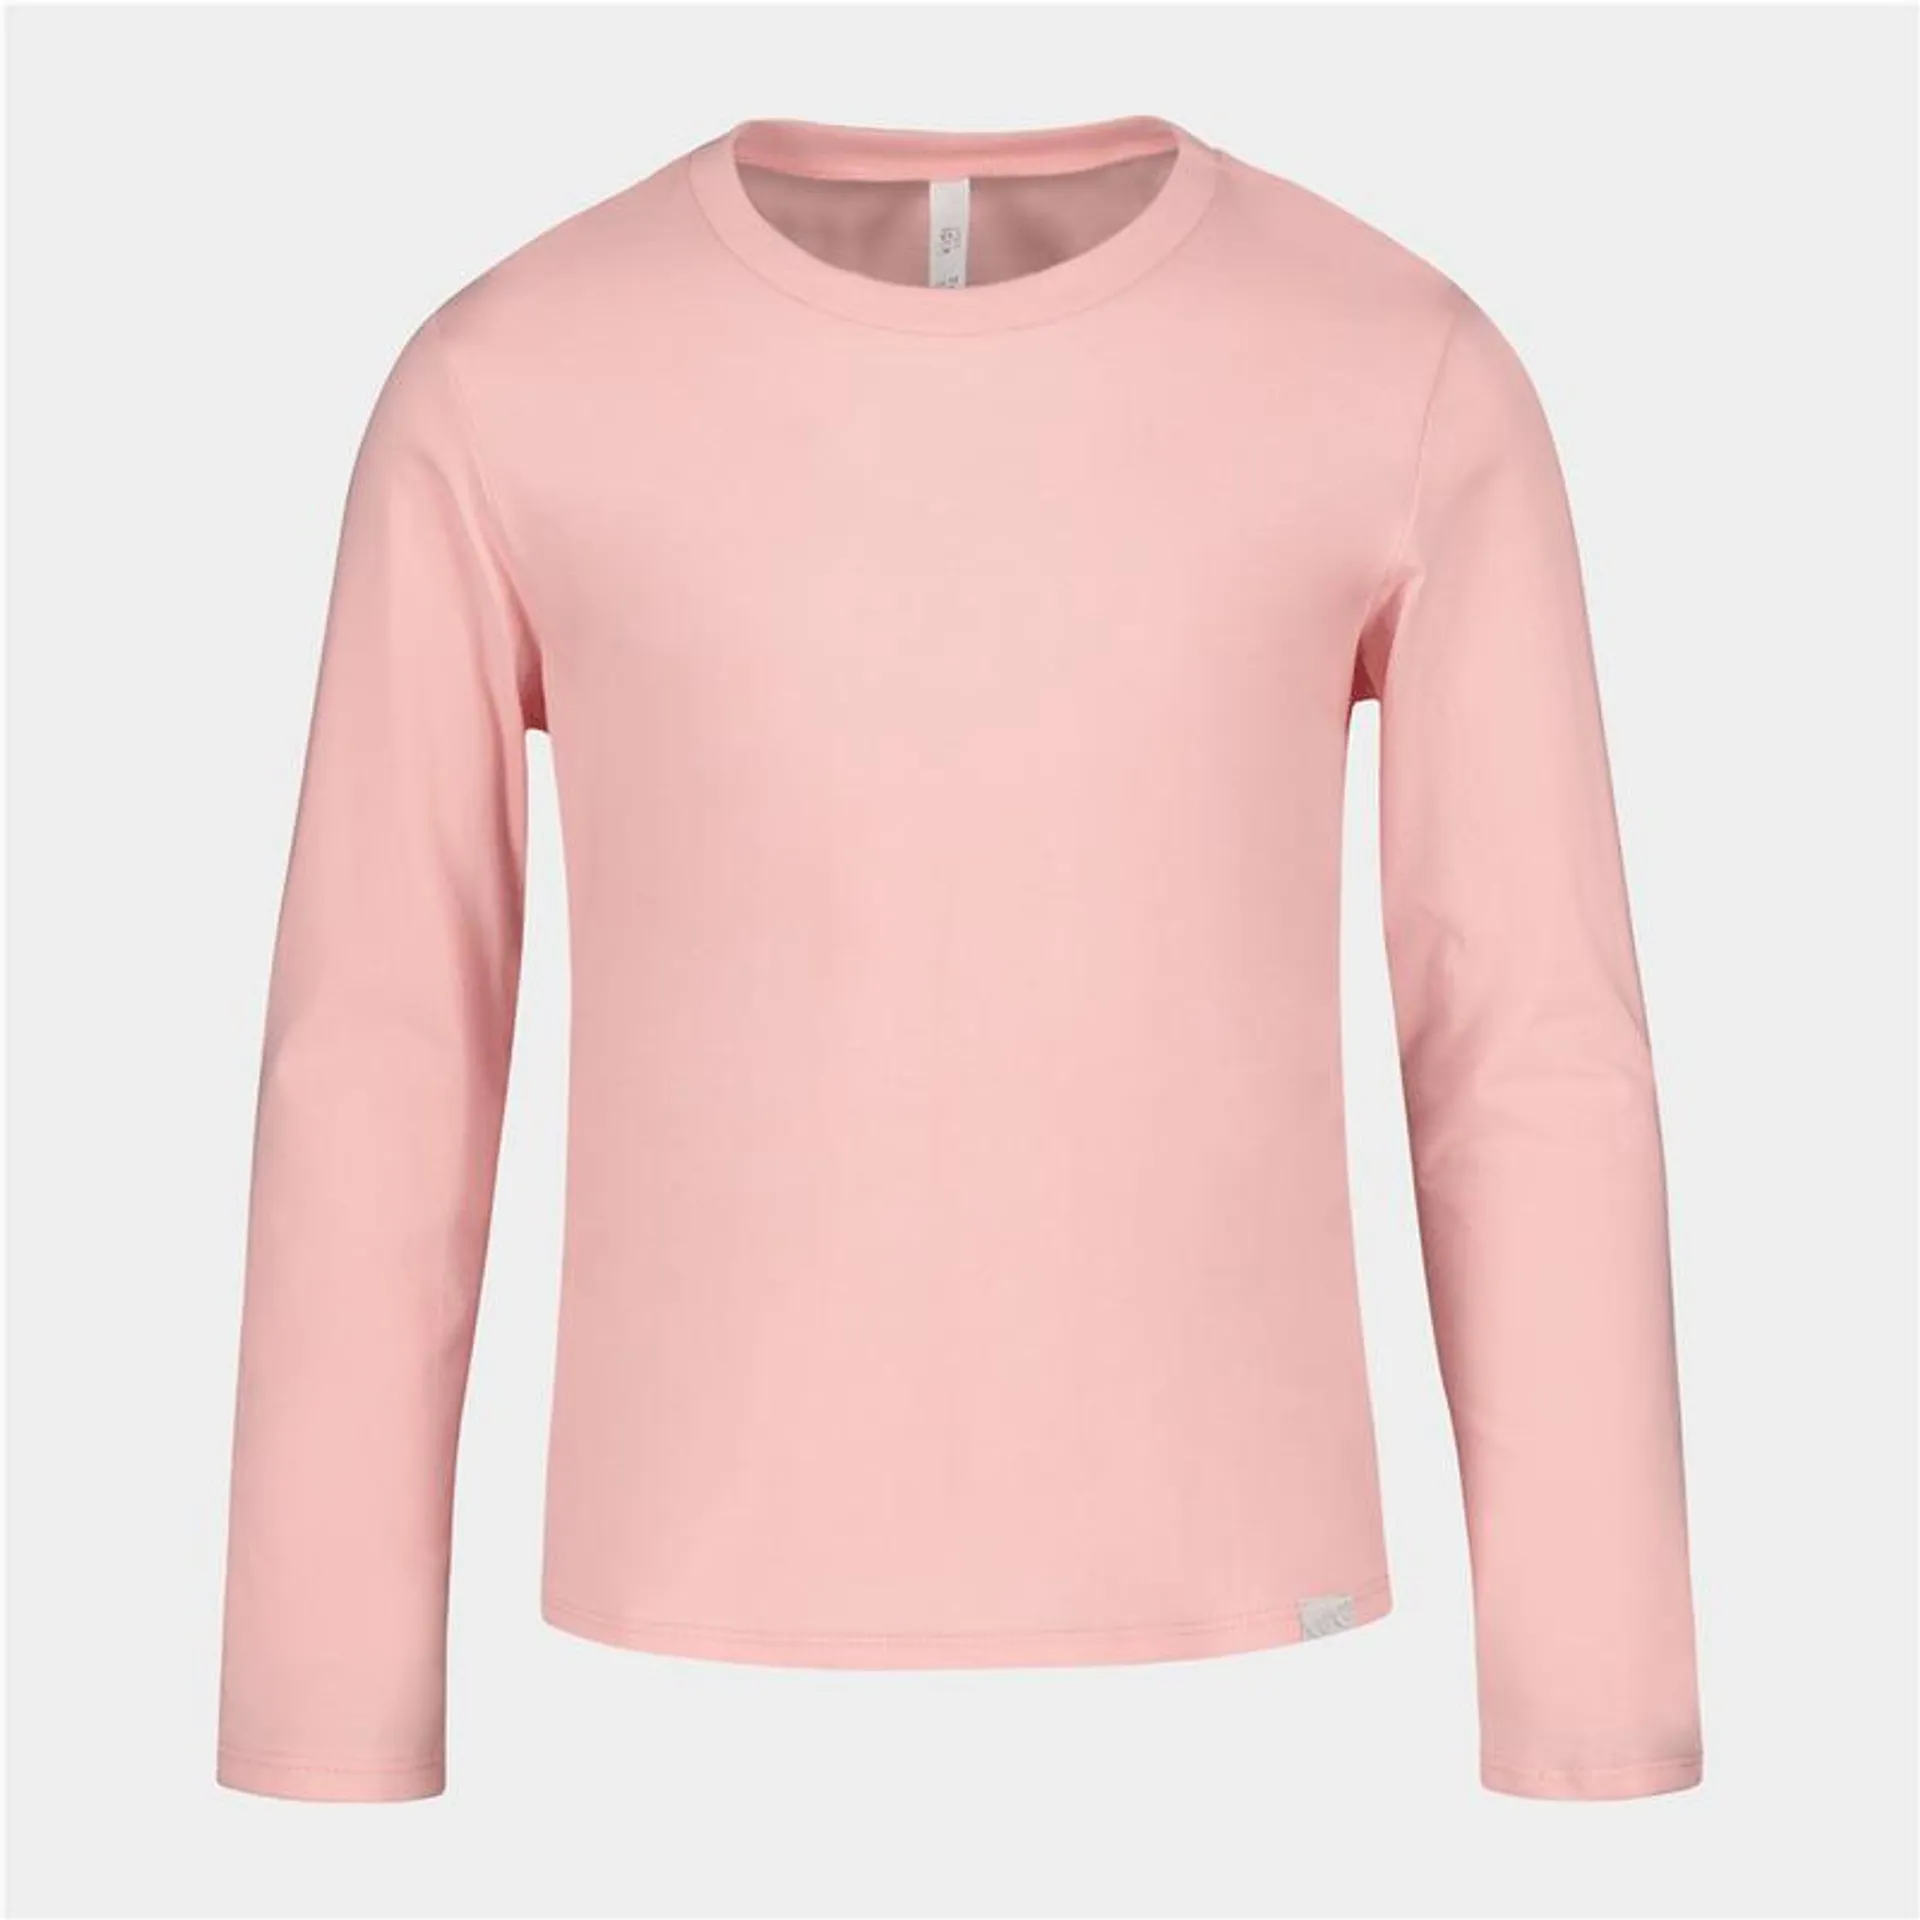 Younger Girl's Pink Basic T-Shirt